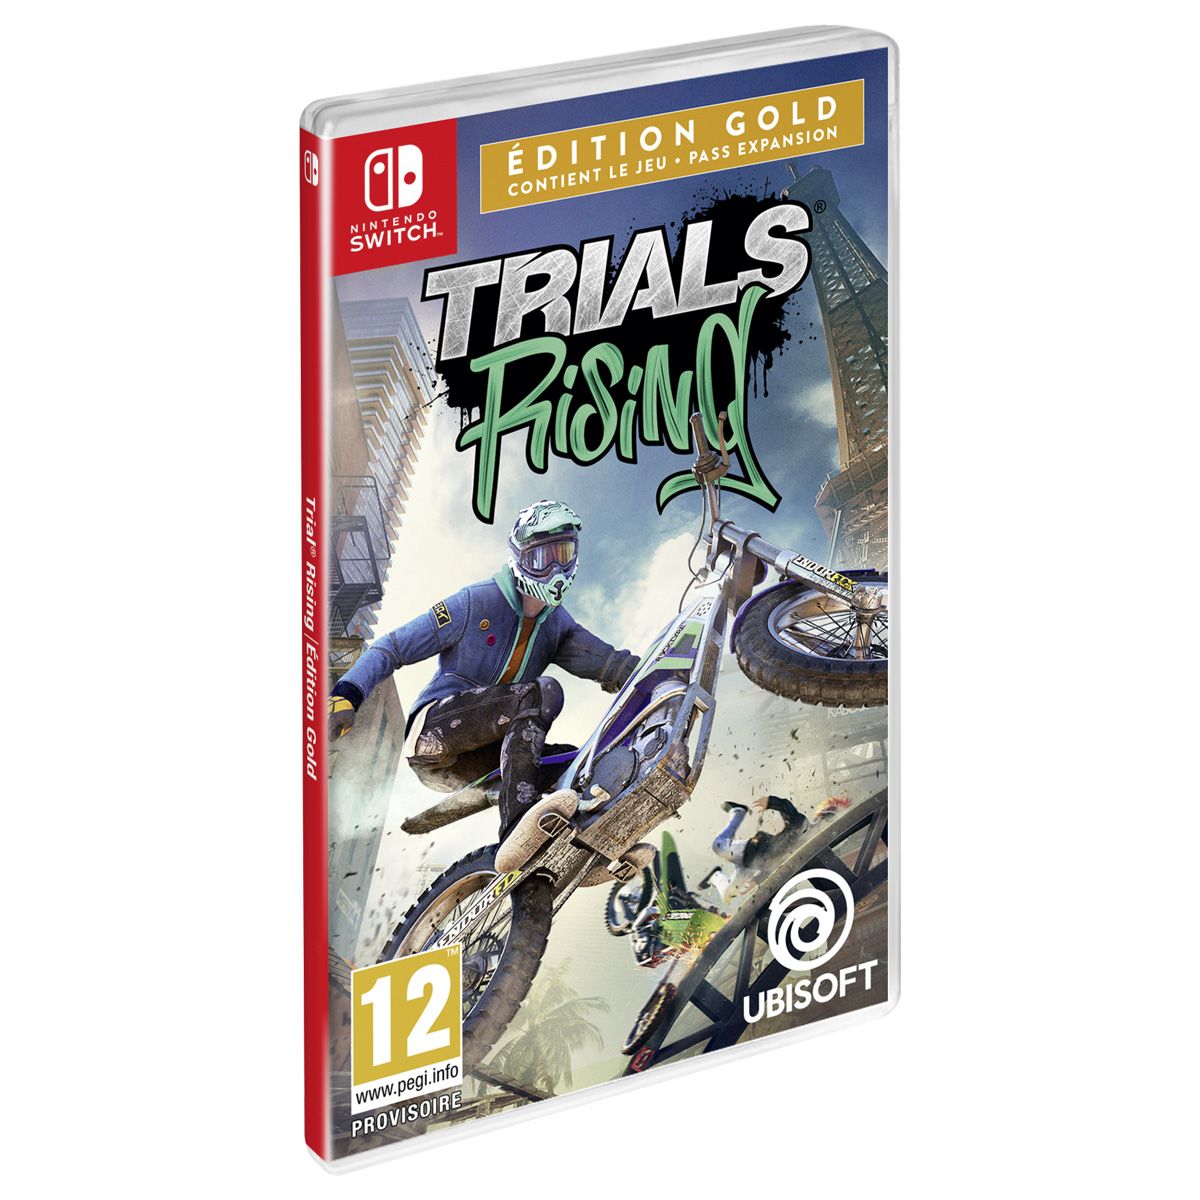 Trials Rising Edition Gold NINTENDO SWITCH